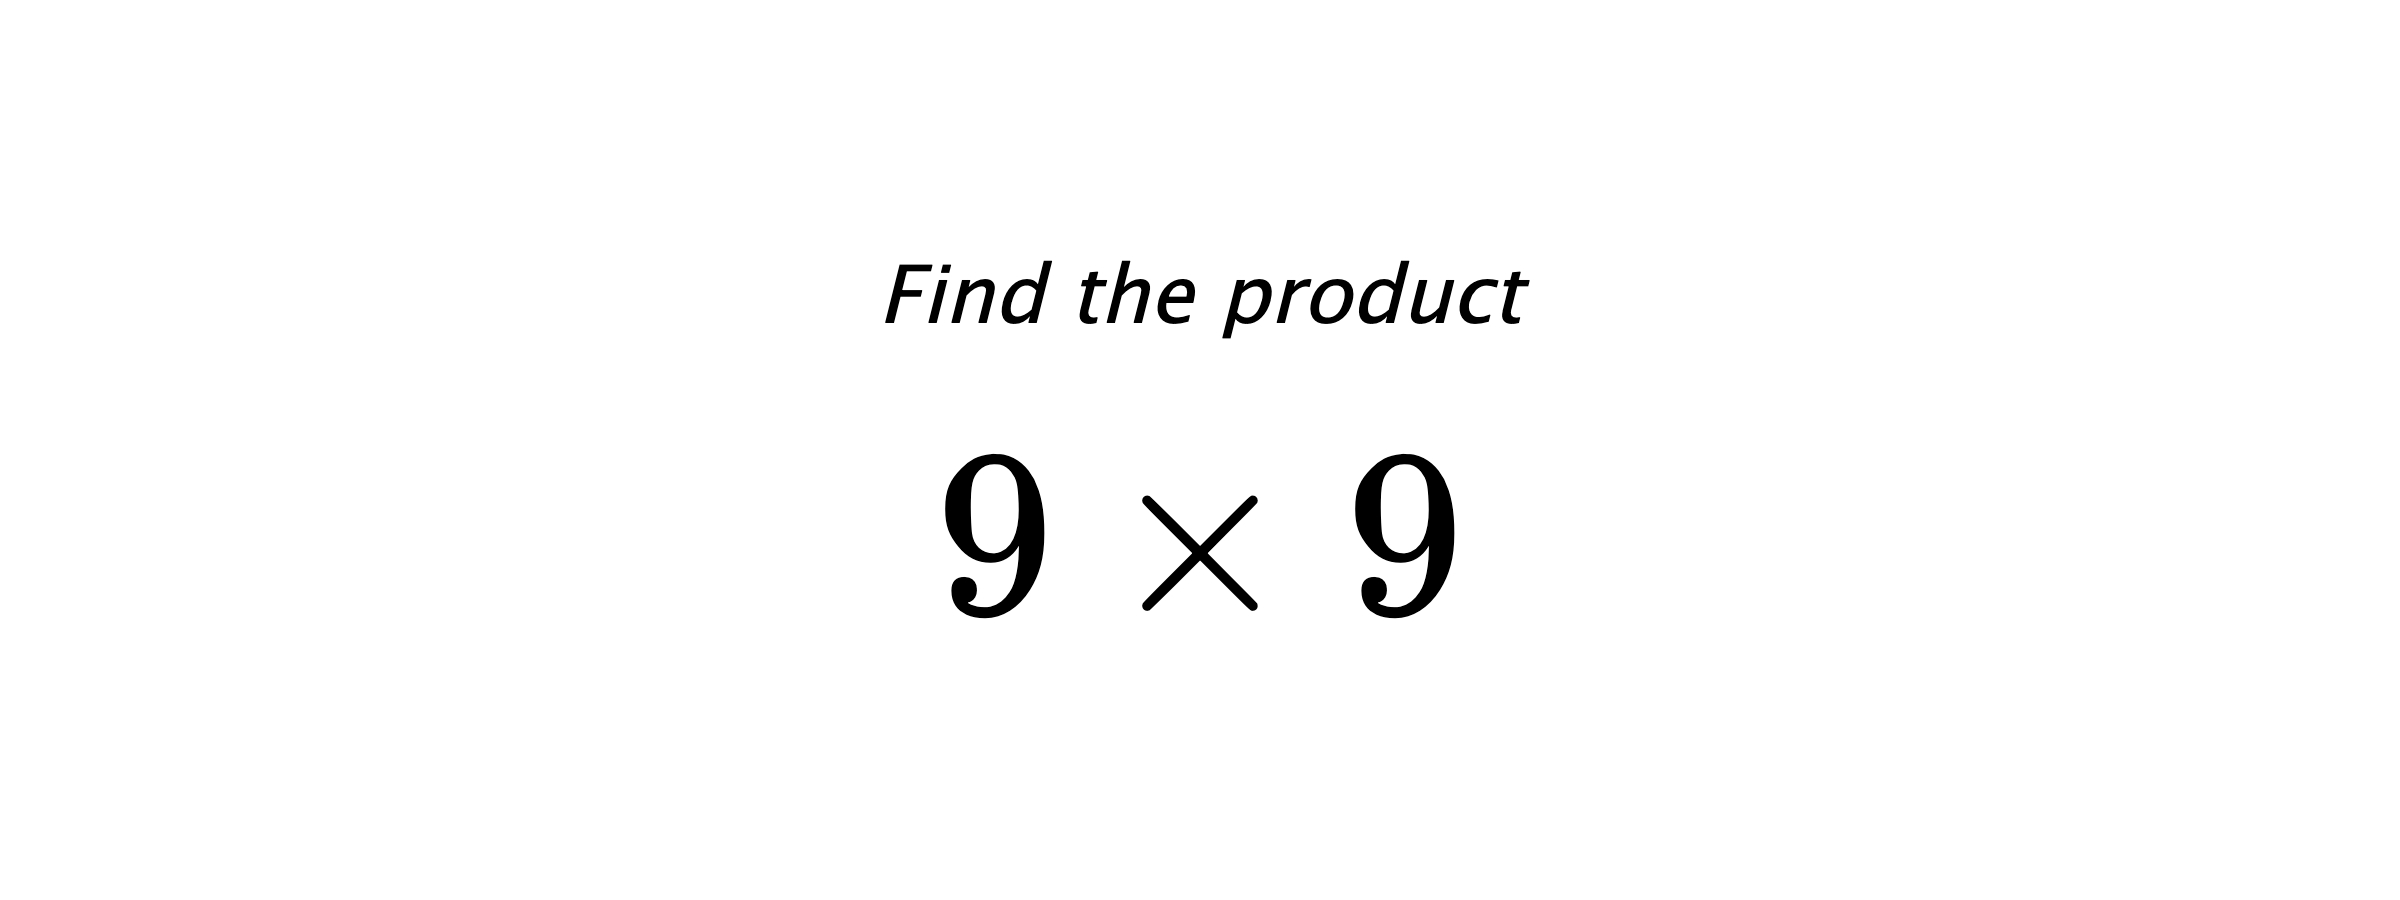 Find the product $ 9 \times 9 $